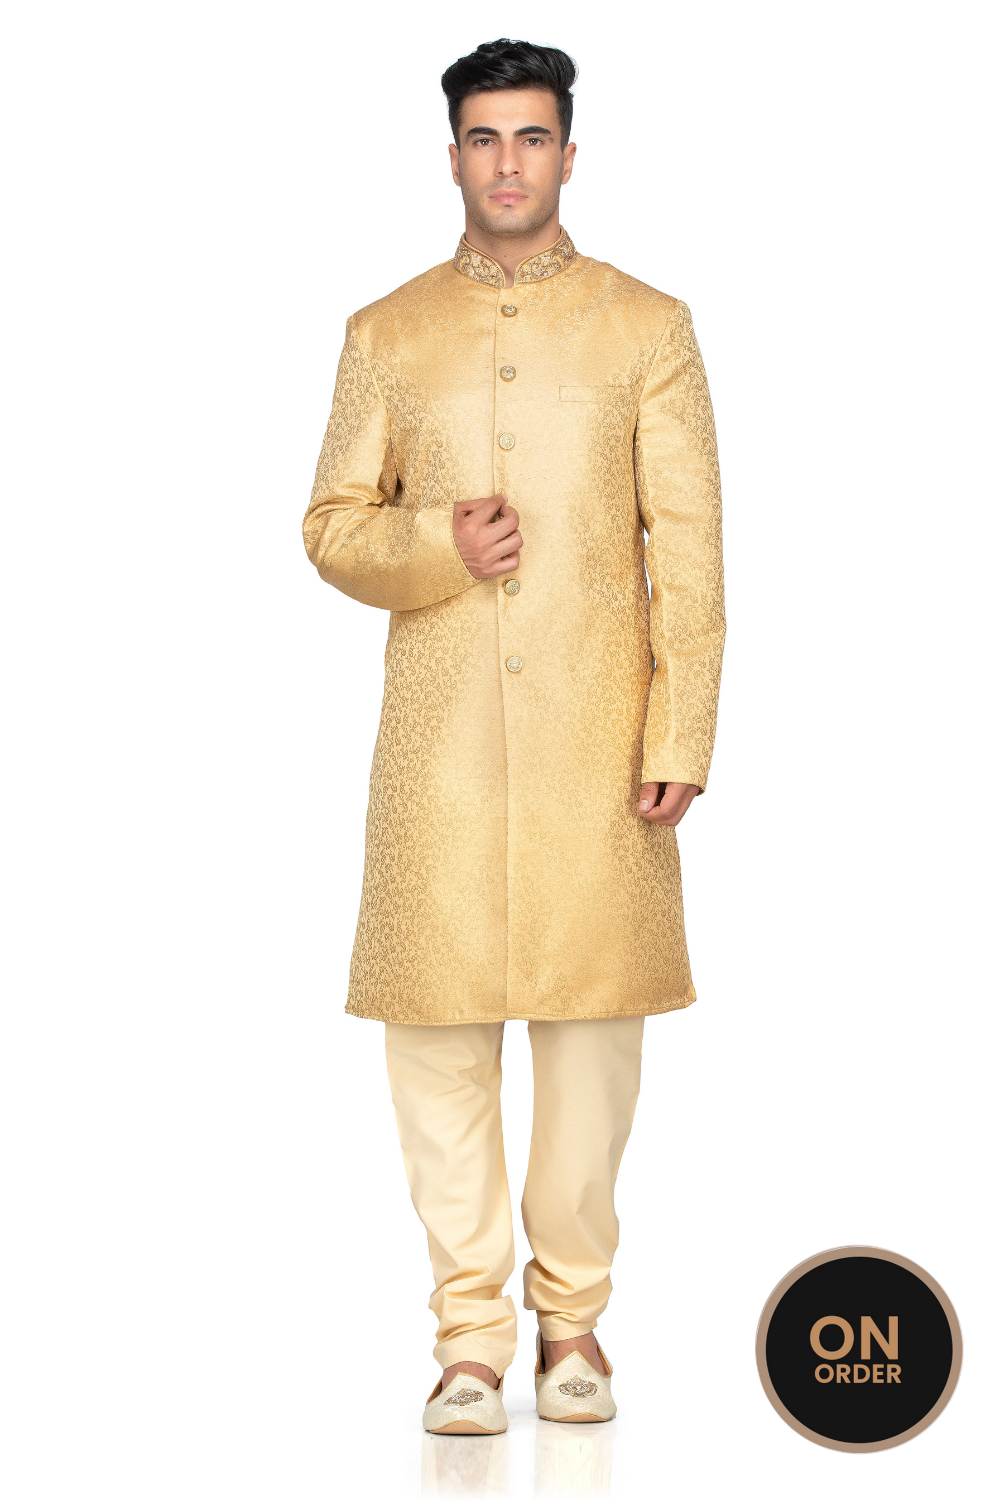 RICH GOLD INDO WESTERN KURTA PAJAMA WITH BAND EMBROIDERY